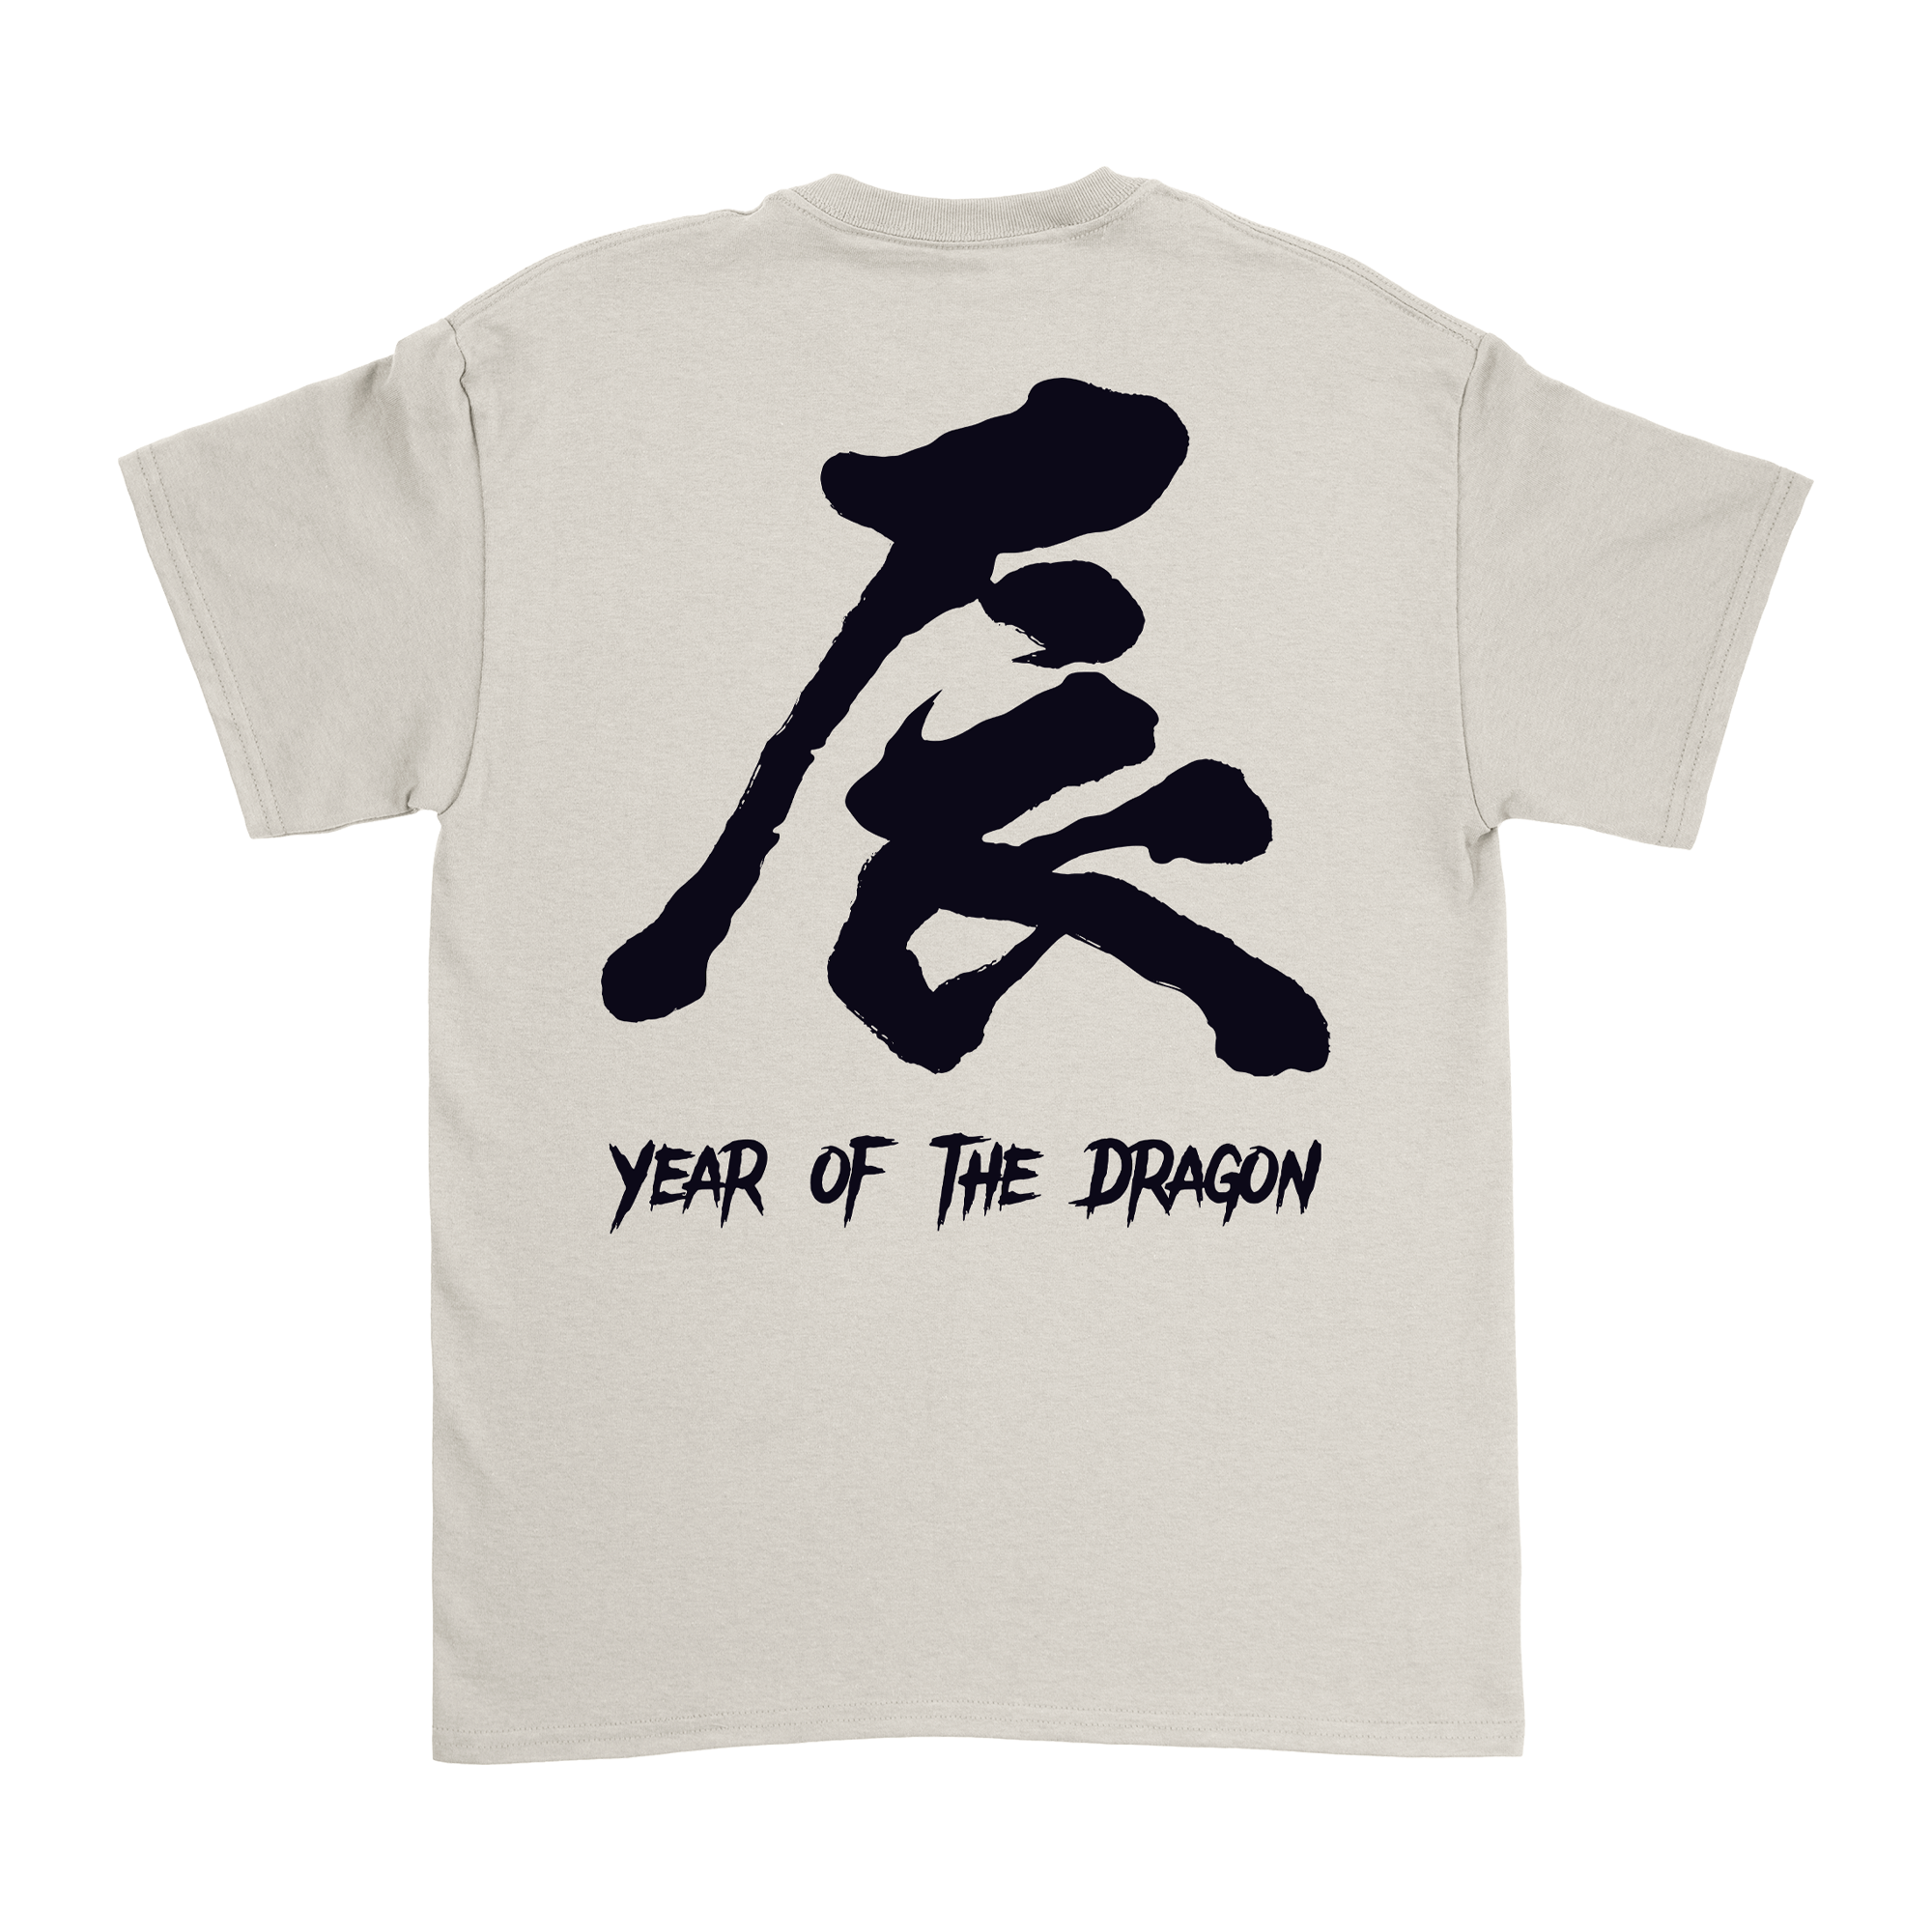 College Burnout - Year of the Dragon T-Shirt (Creme)